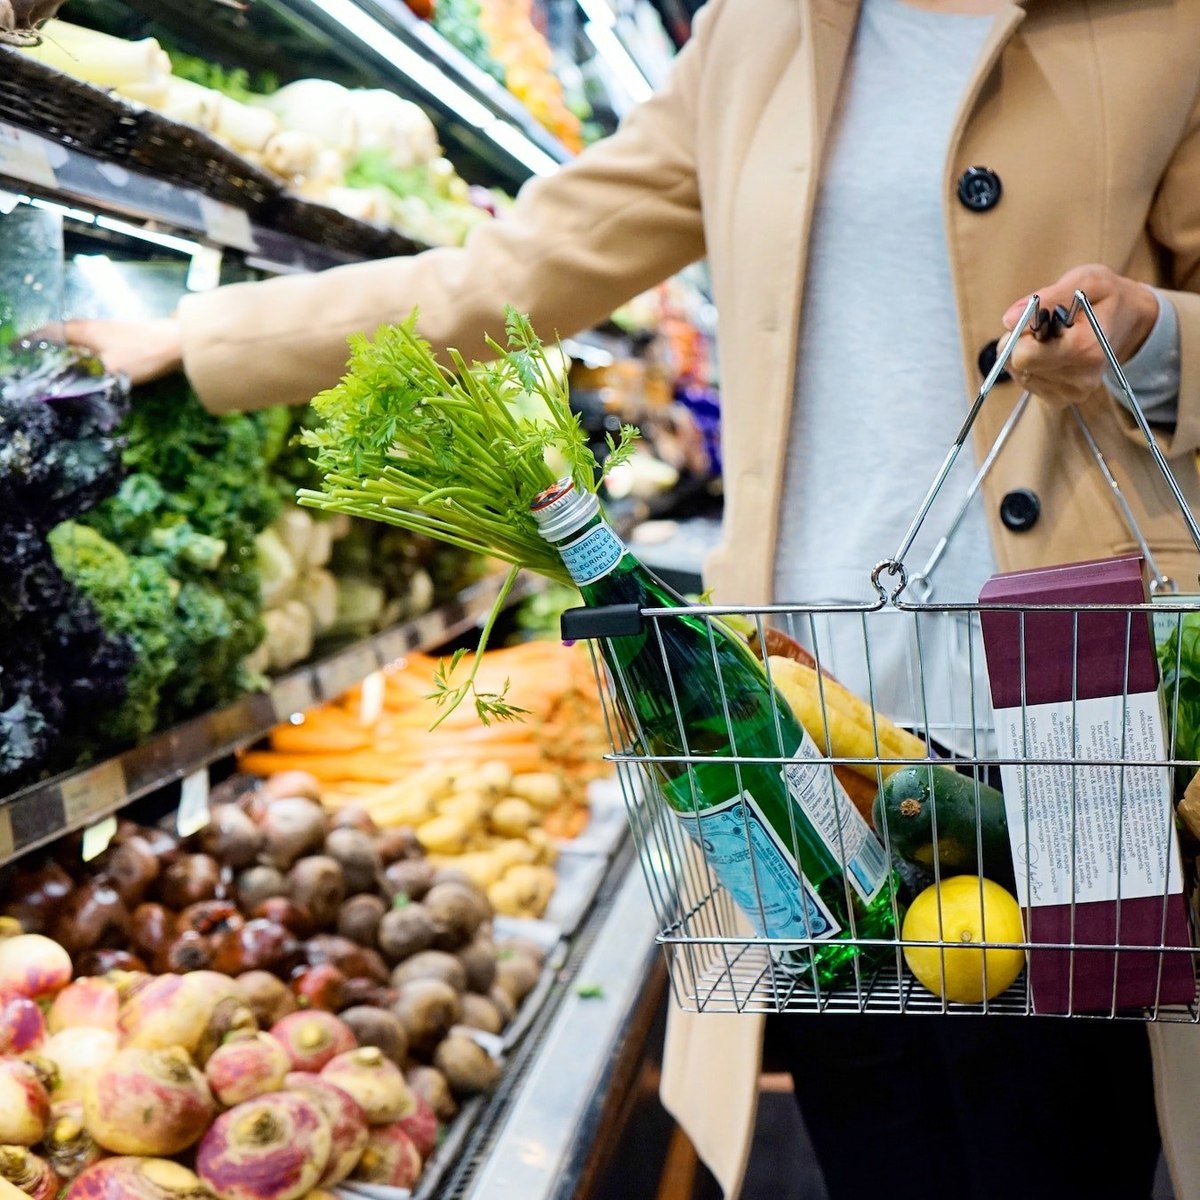 The best value-for-money supermarkets in Britain